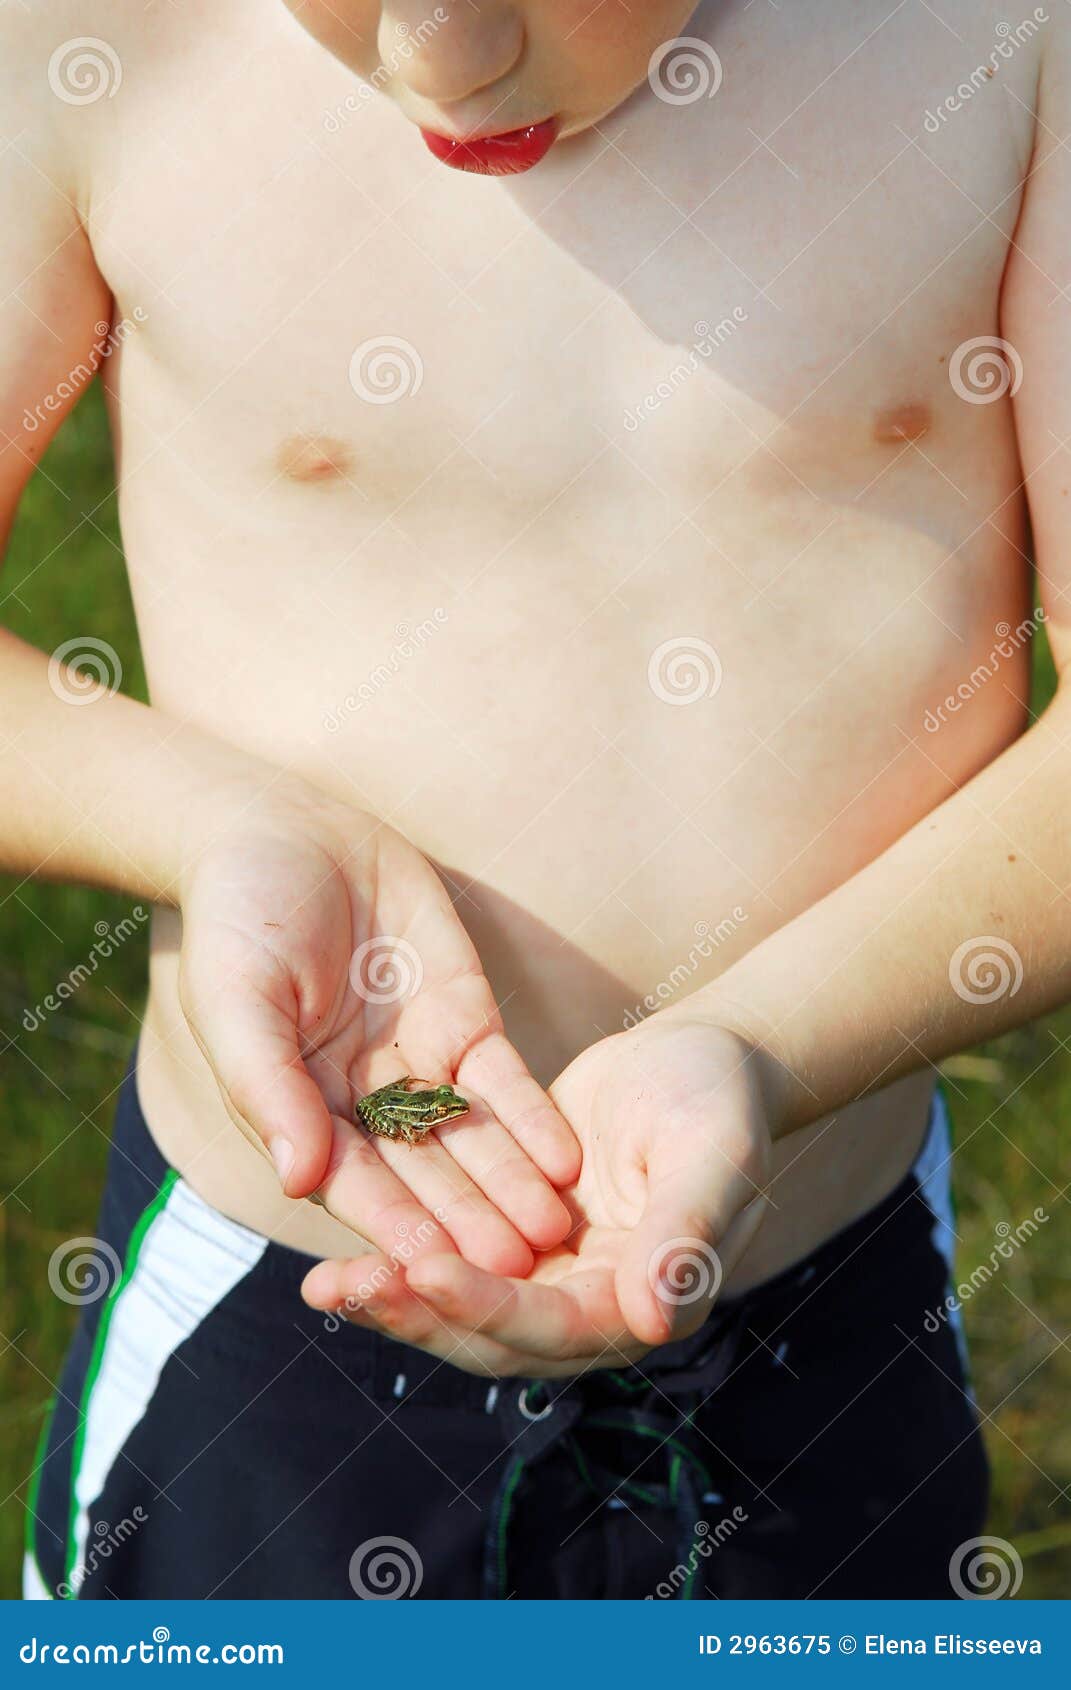 Boy Holding A Frog Royalty Free Stock Photo - Image: 2963675